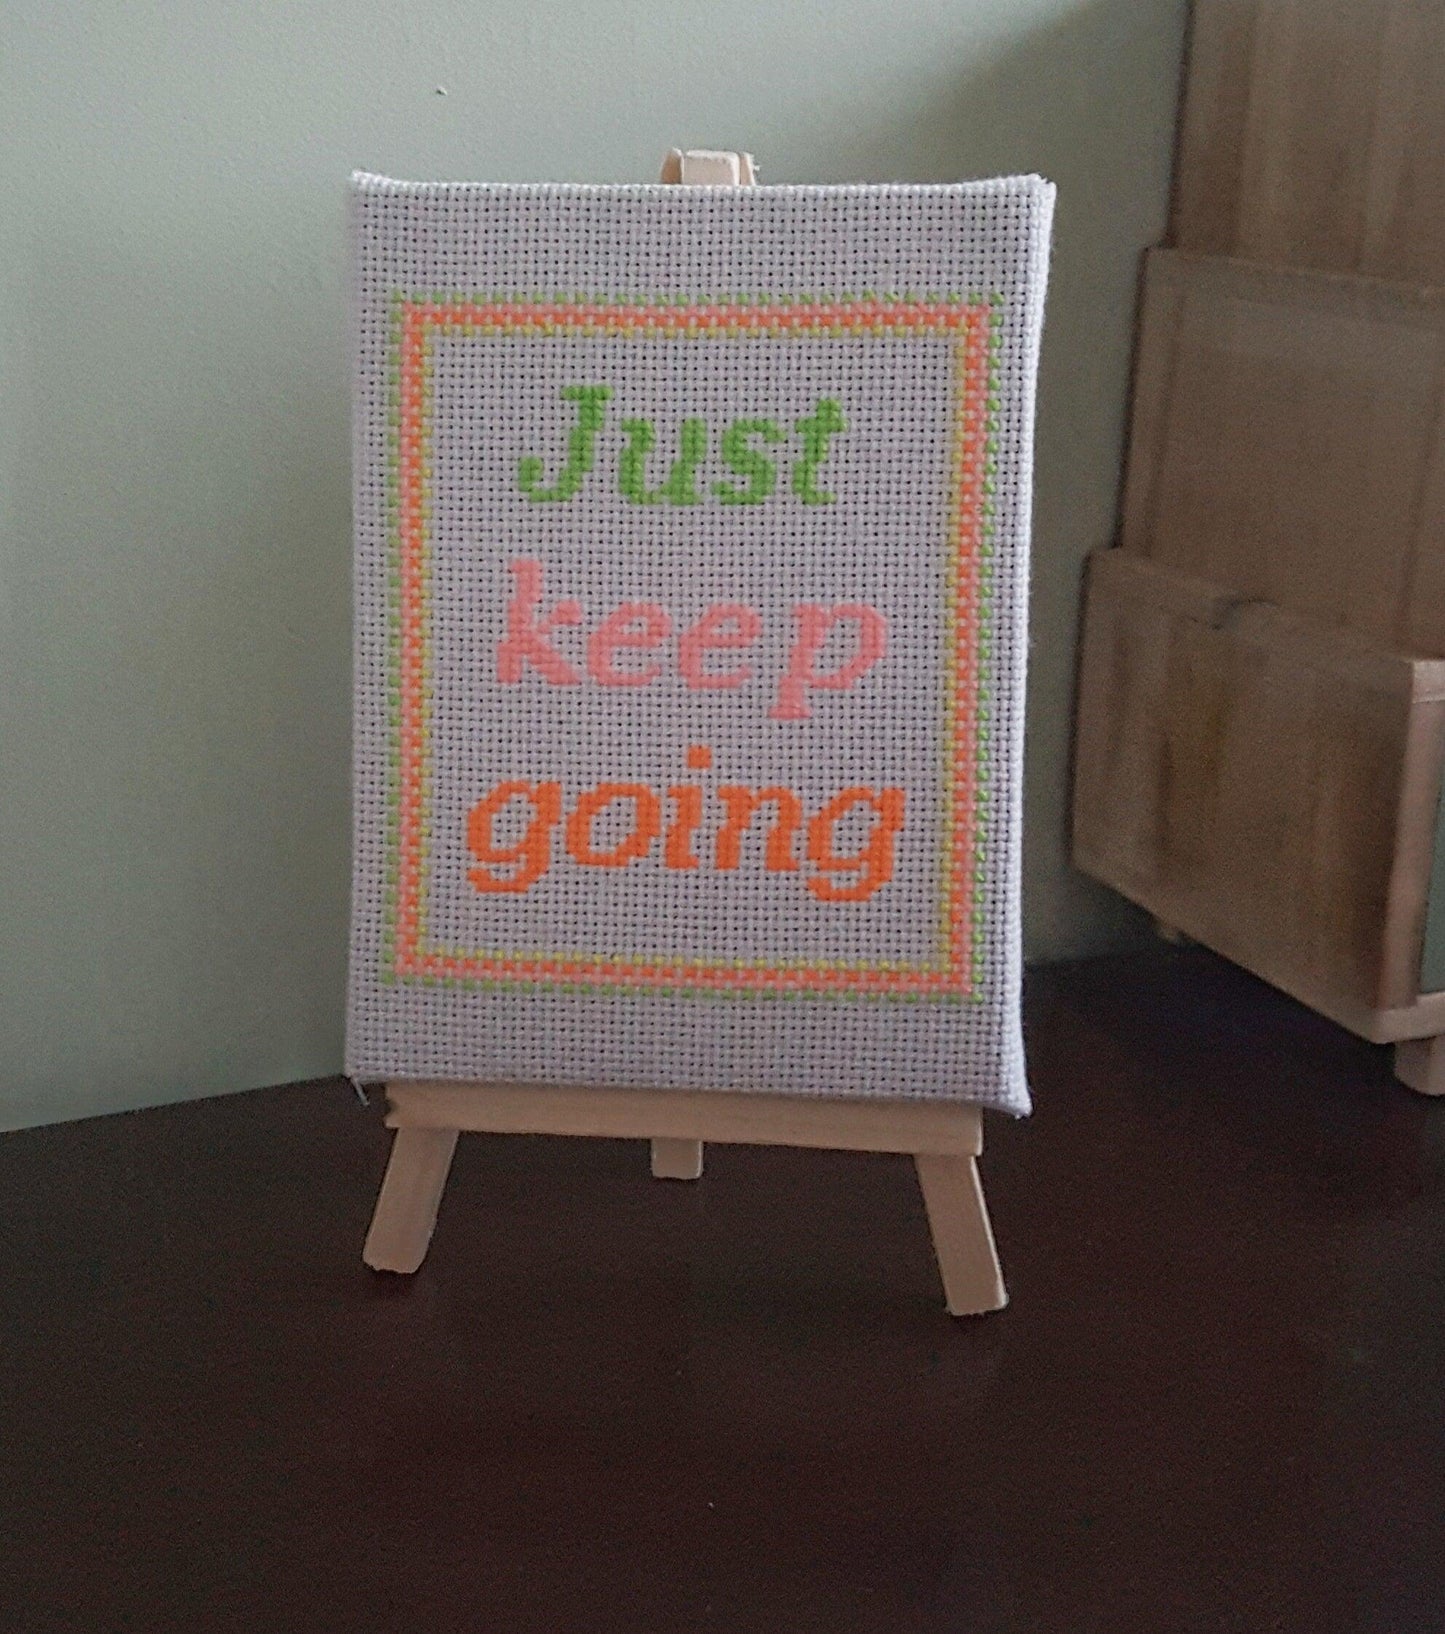 Just keep going, completed cross stitch quote